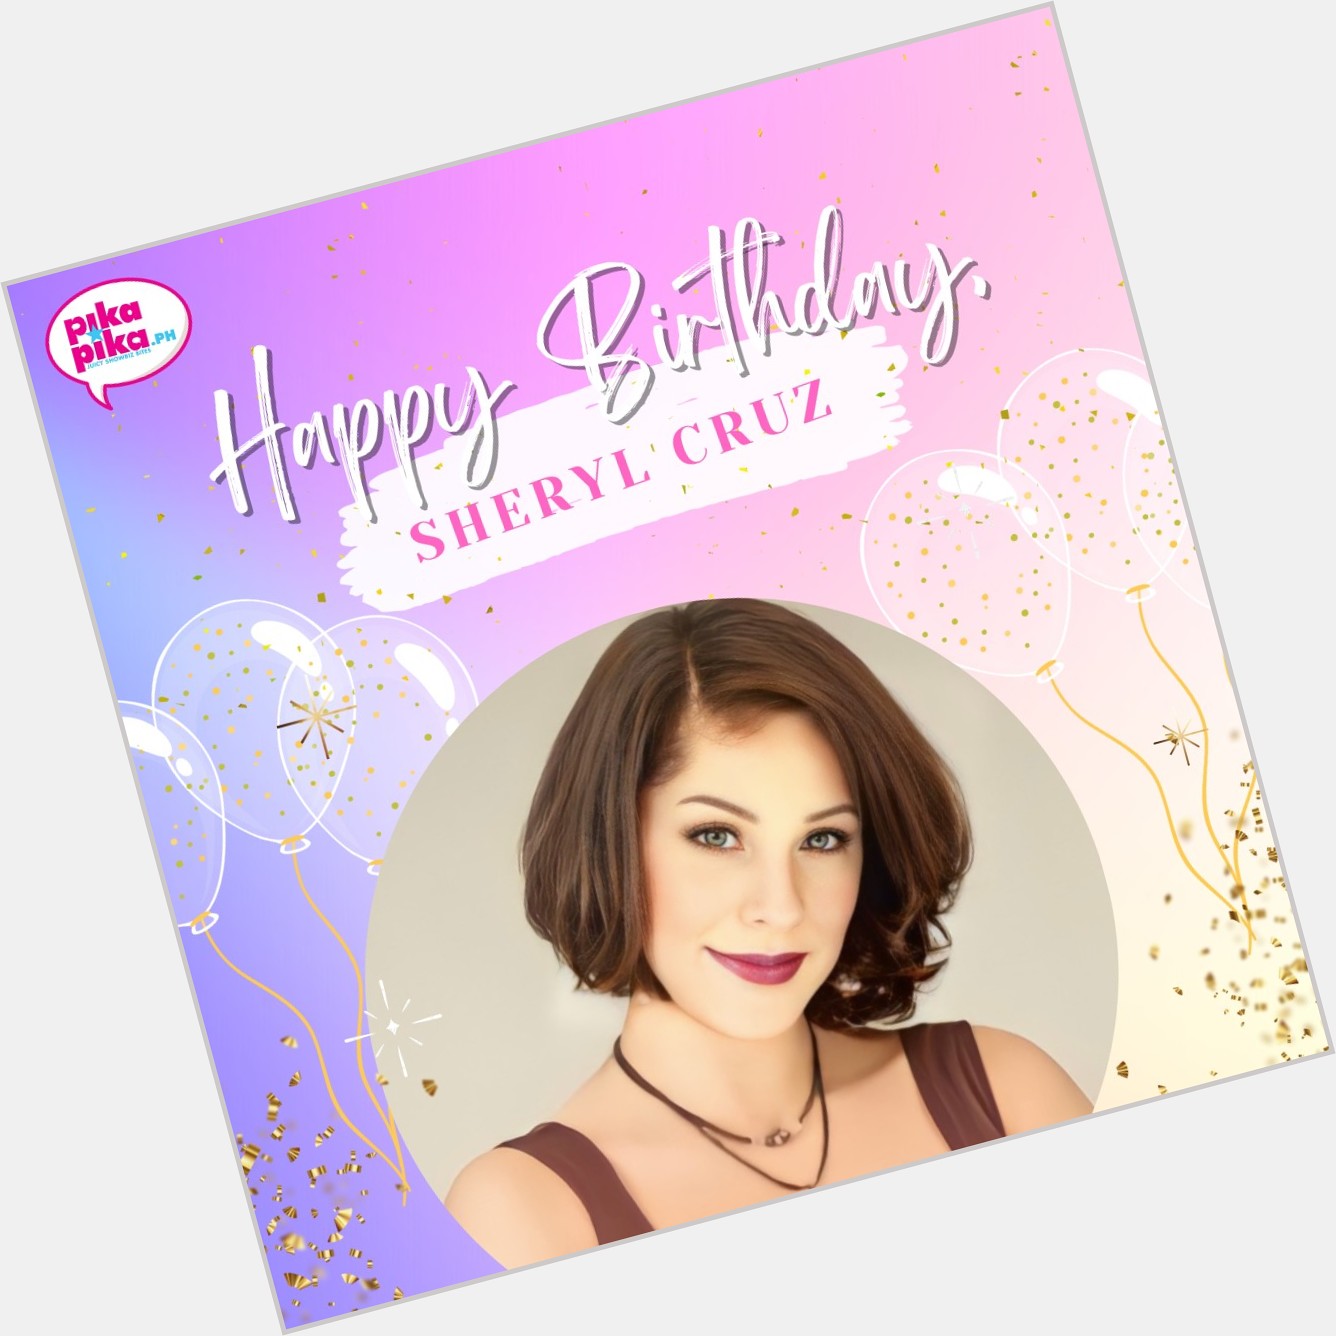 Happy birthday, Sheryl Cruz! May your special day be filled with love and cheers.    